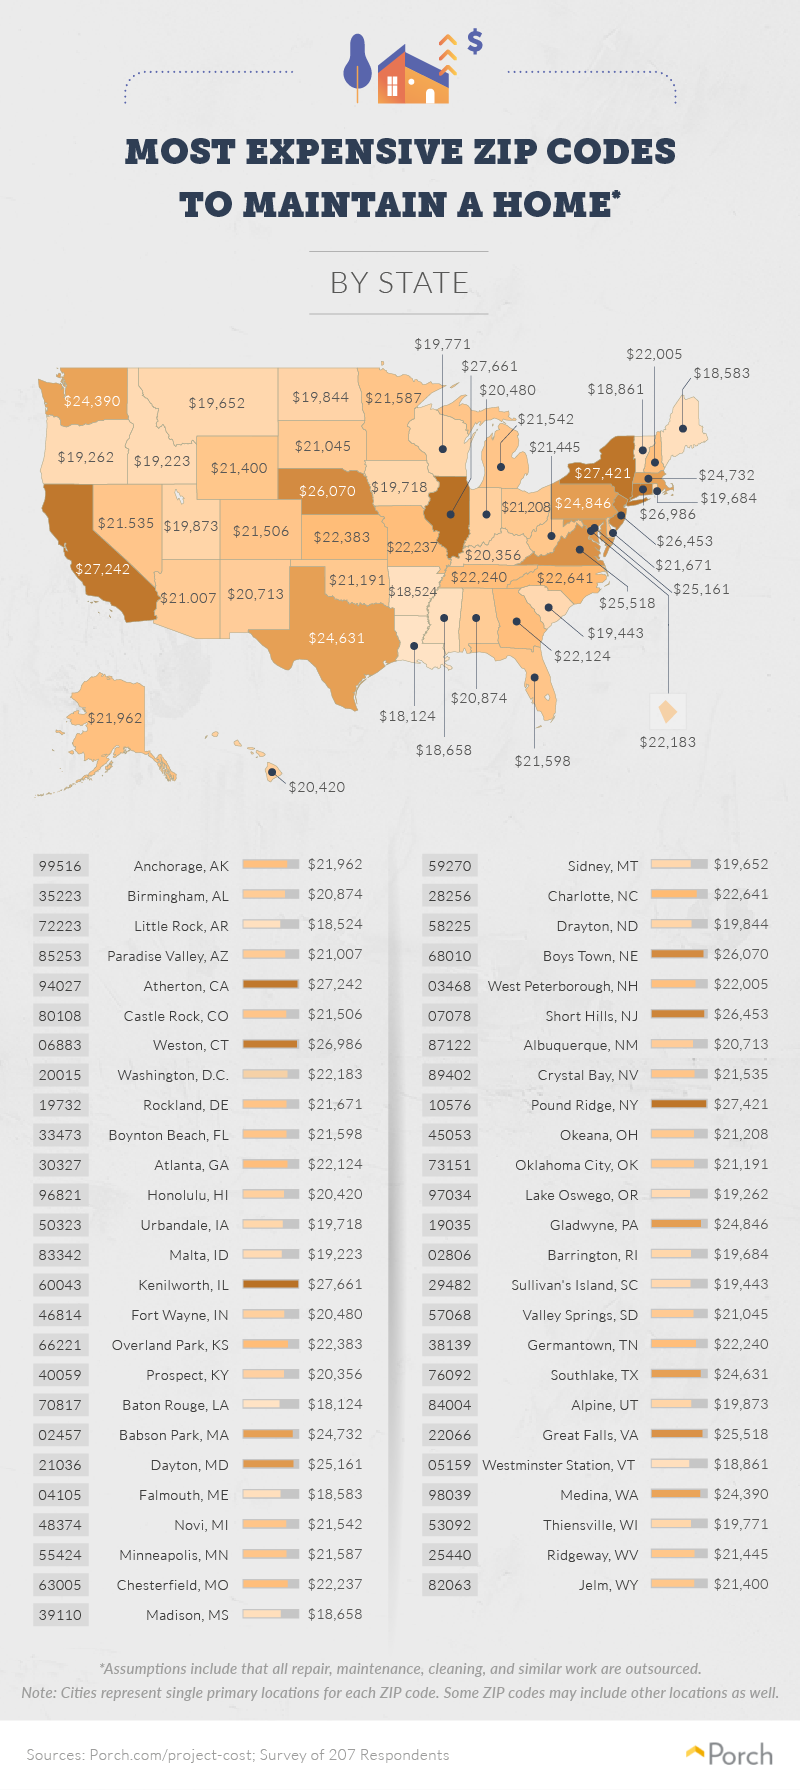 Most expensive zip codes to maintain a home